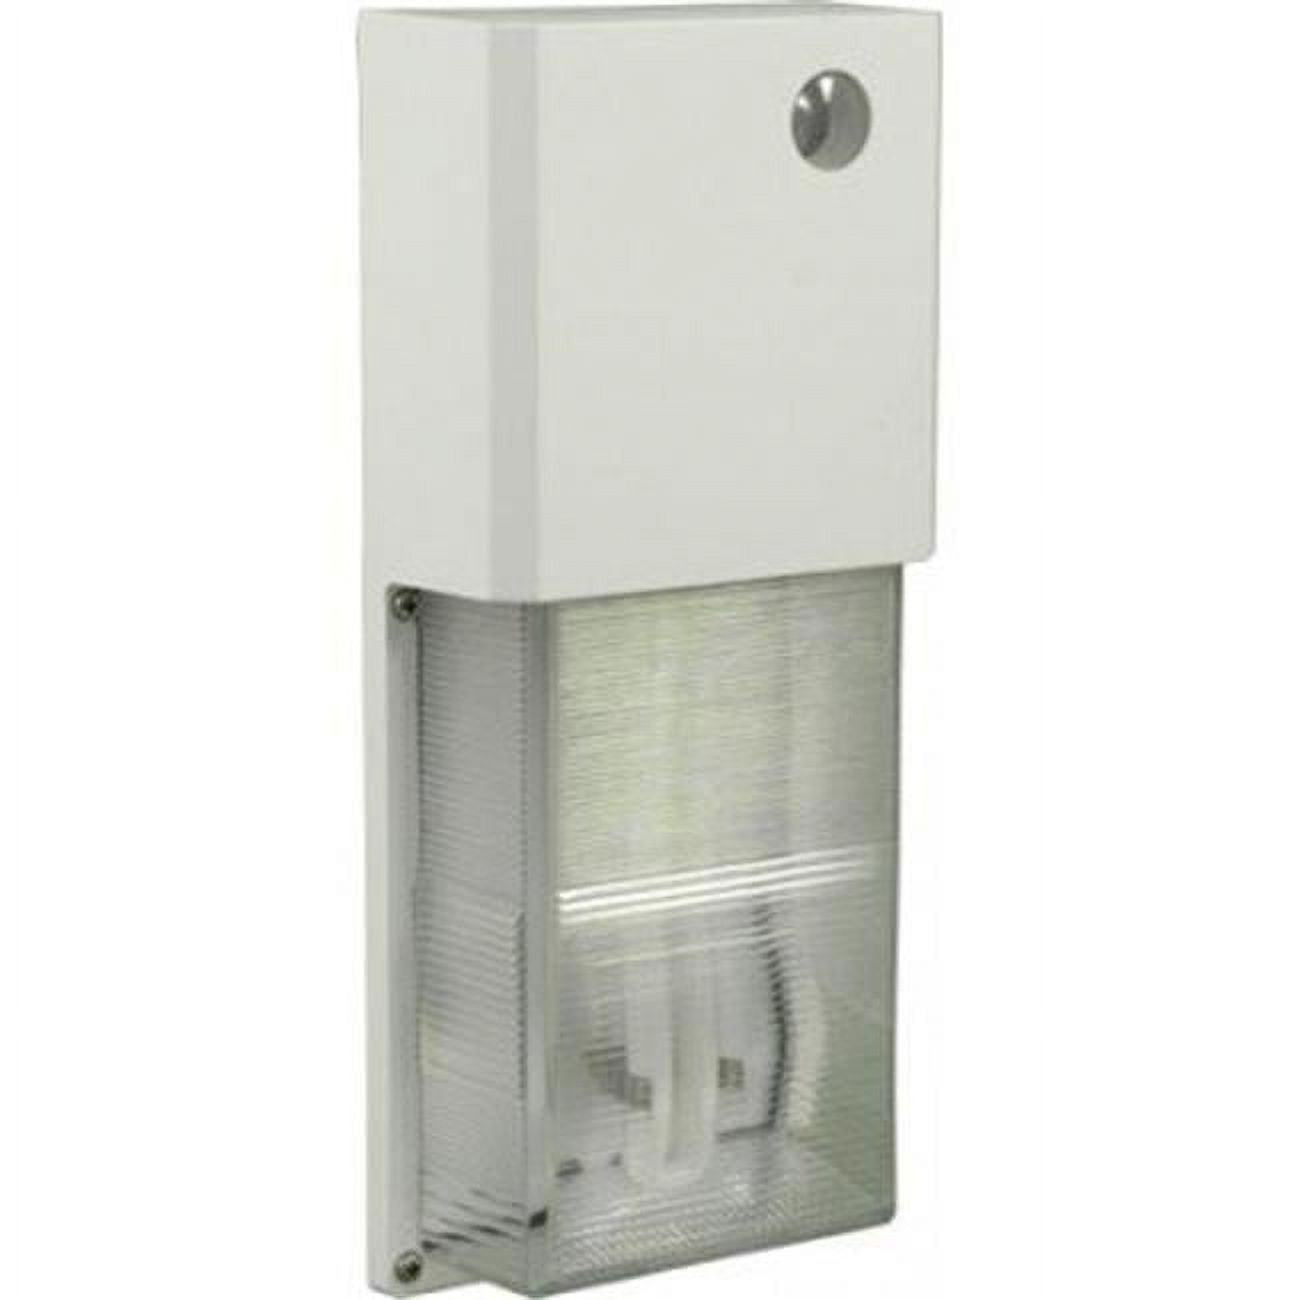 Picture of Dabmar Lighting W2001-LED5-W 5W & 120V LED Polycarbonate Surface Mount Wall Fixture - White